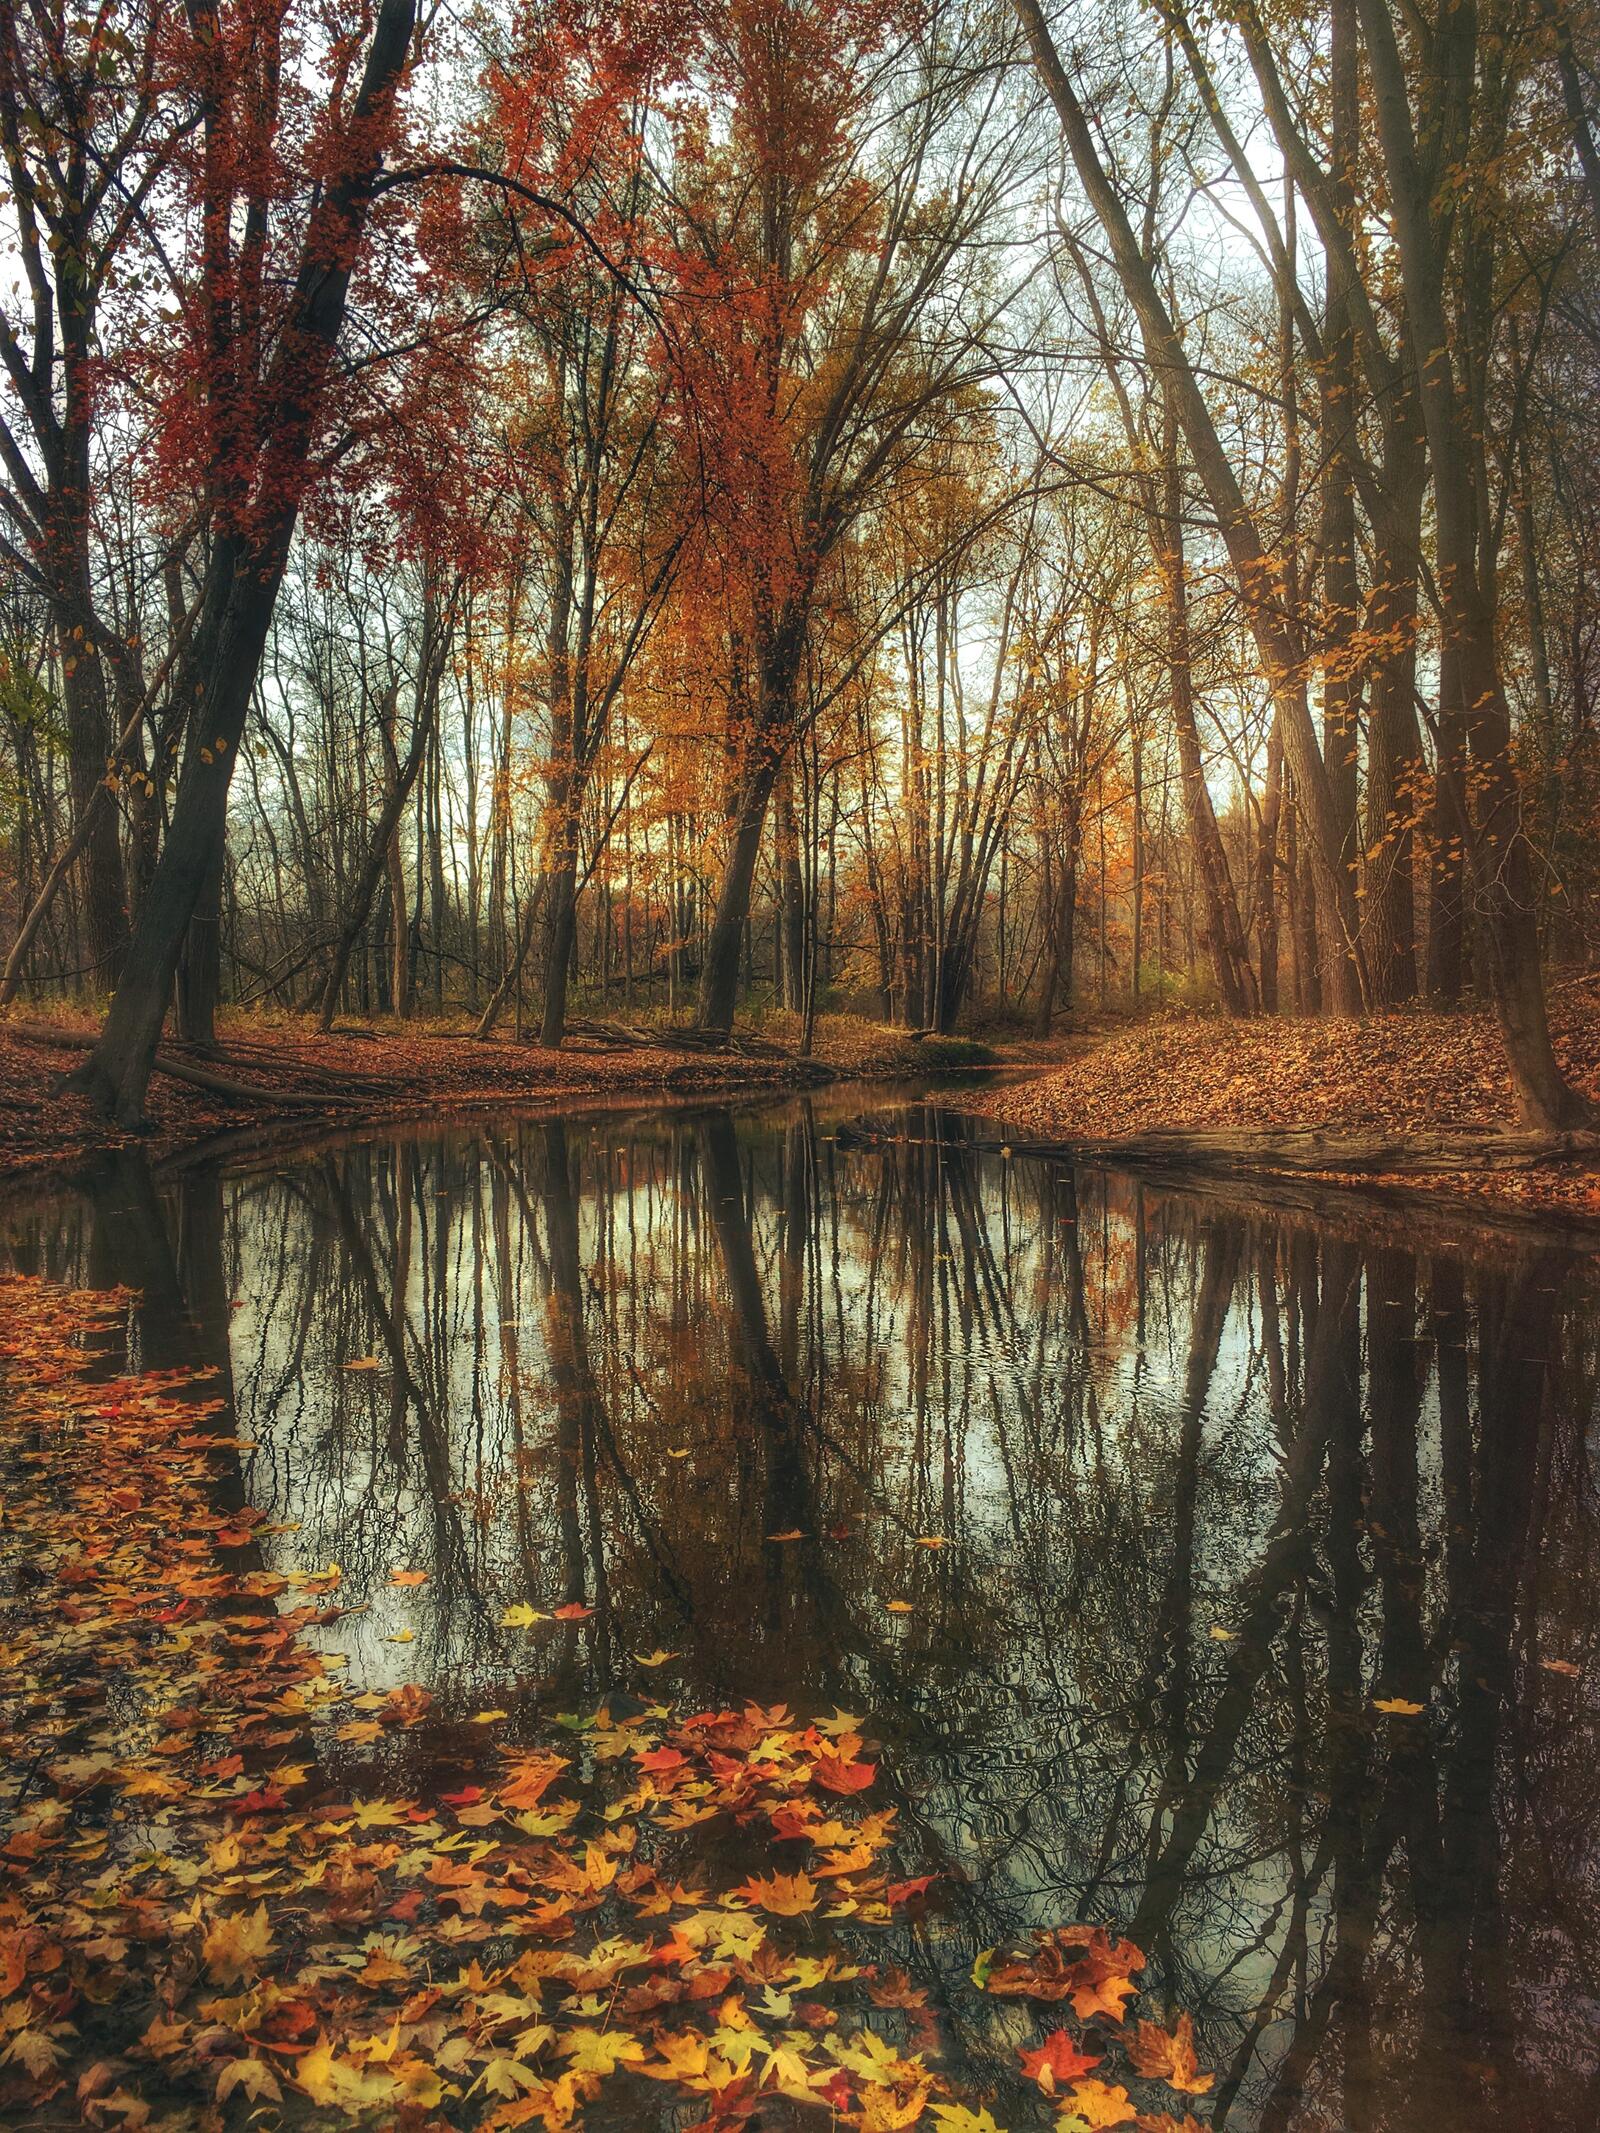 Free photo The banks of the river are strewn with fallen leaves of yellow color